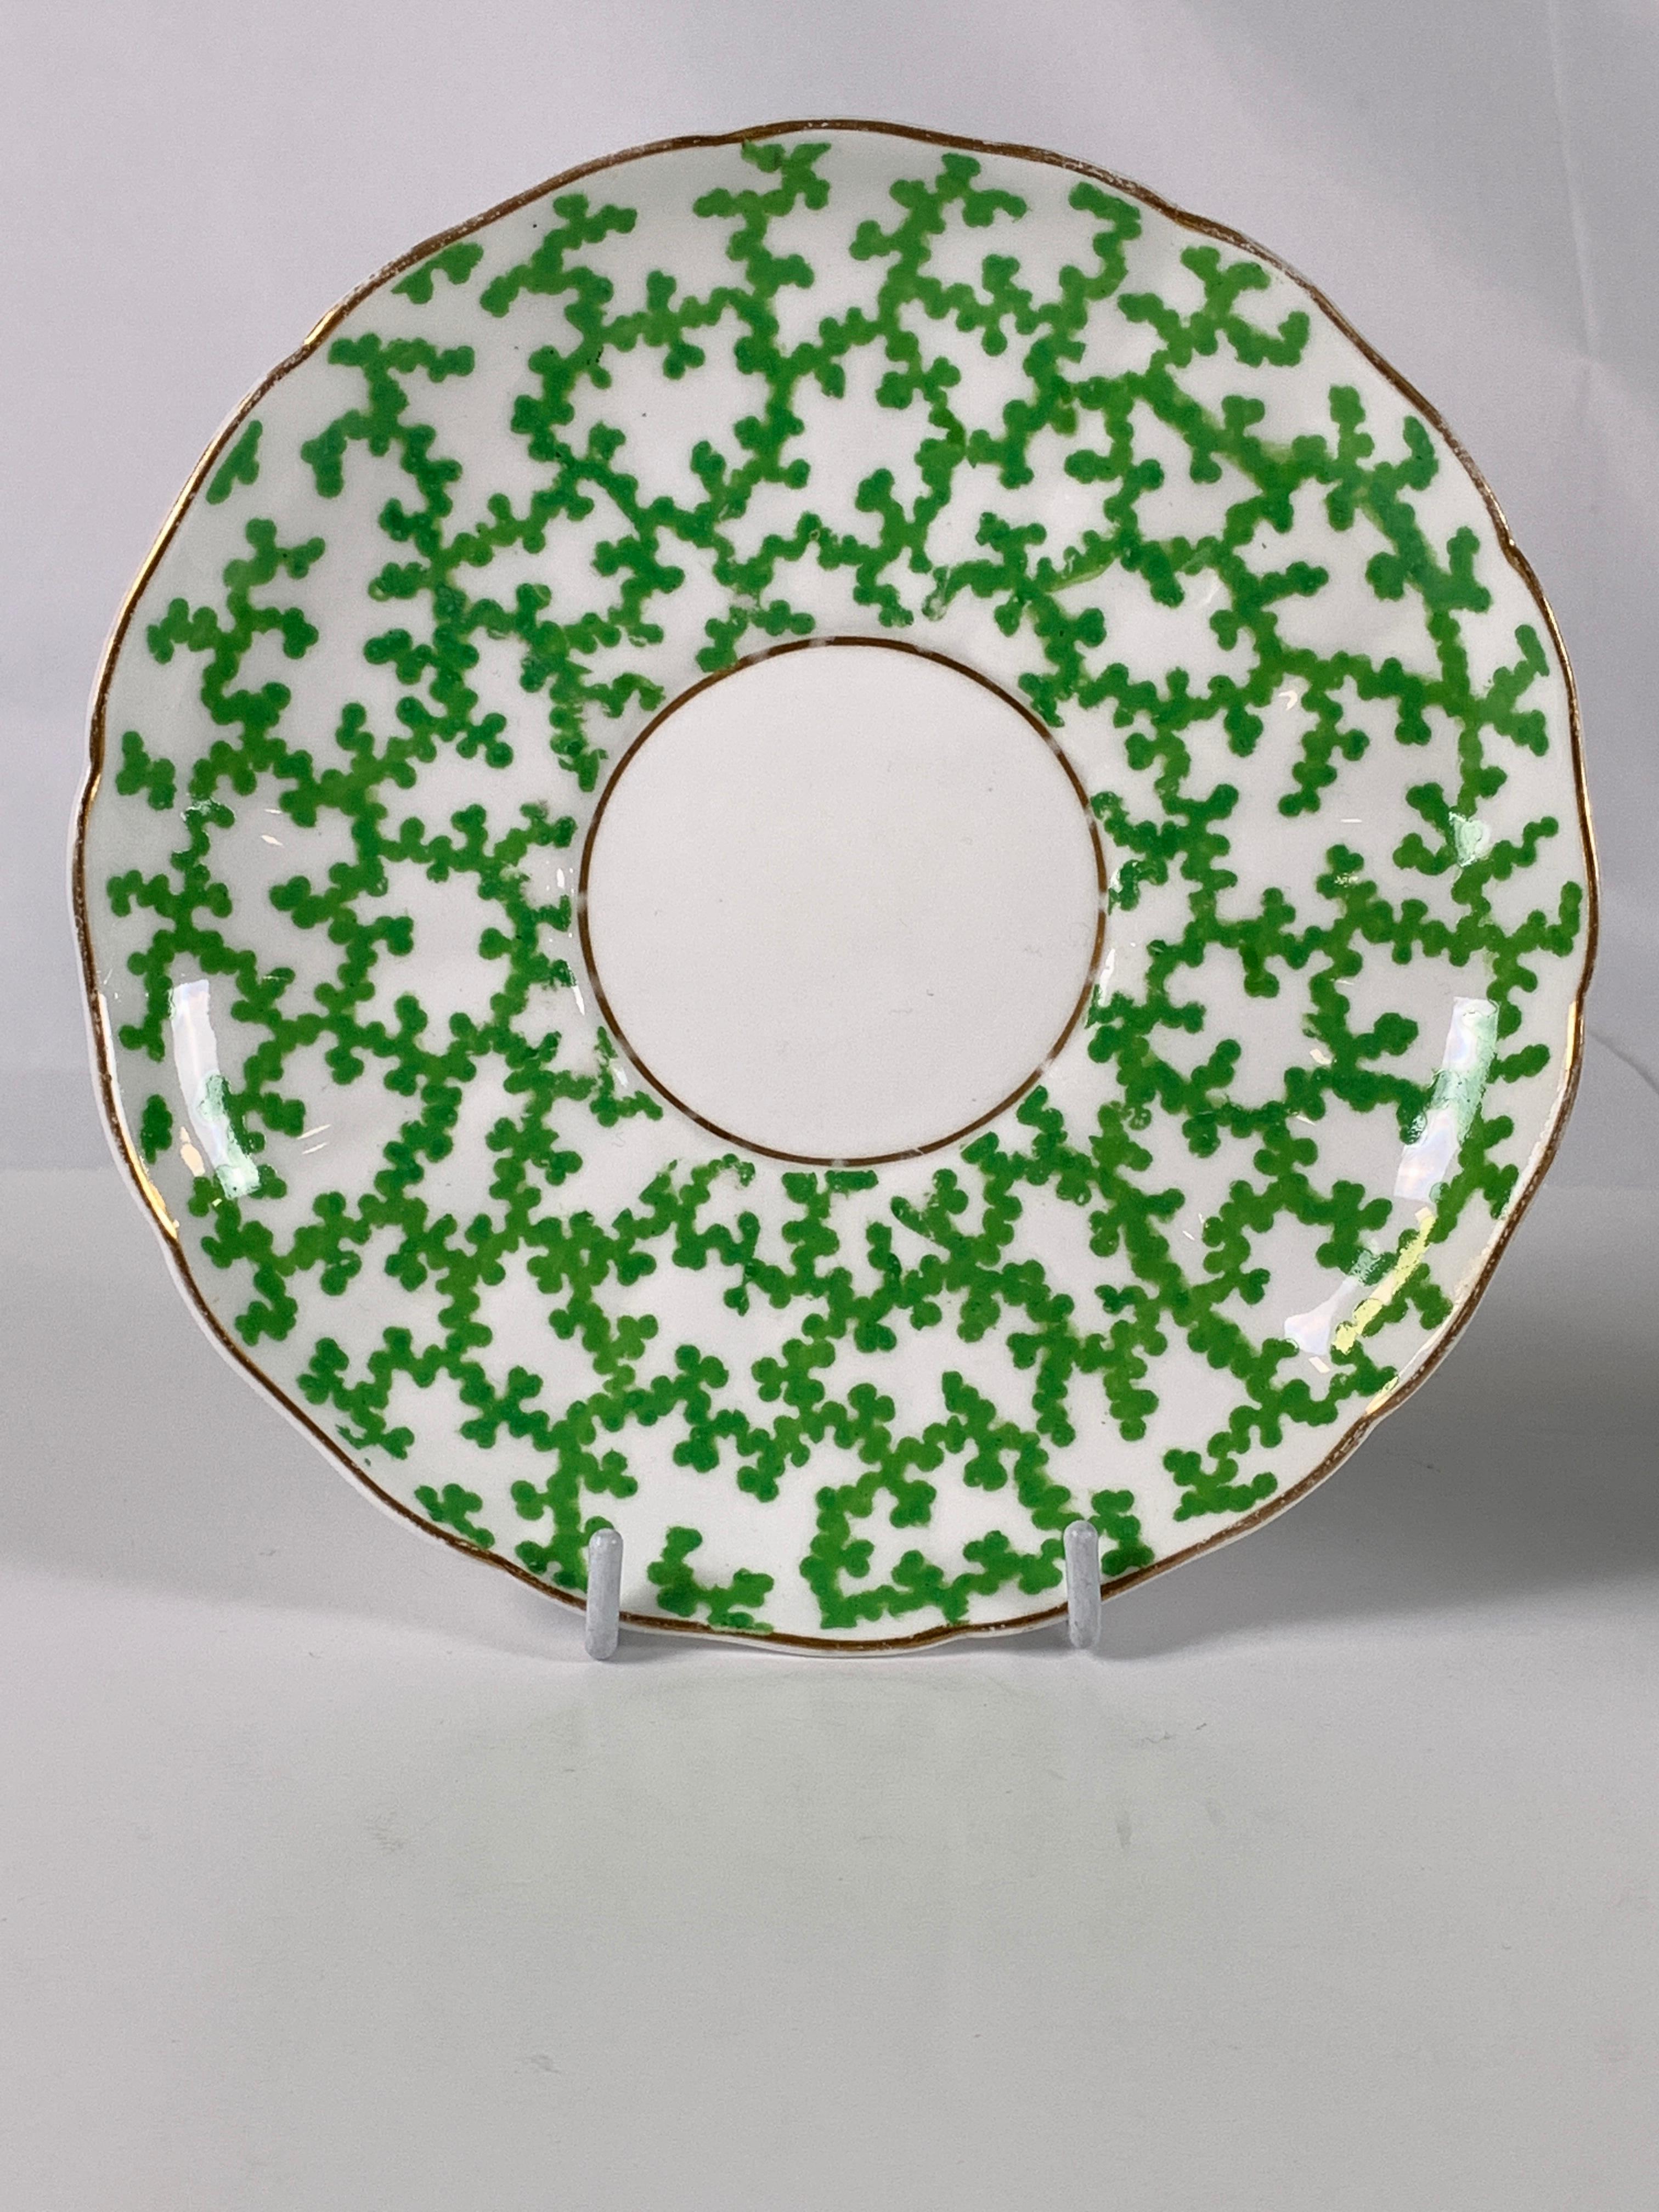 Provenance: The Private Collection of Mario Buatta 
This large breakfast cup and saucer is decorated with a bright green vine pattern on clean white porcelain. Made in England circa 1825, it is perfect for a very large cup of morning coffee.
Mario